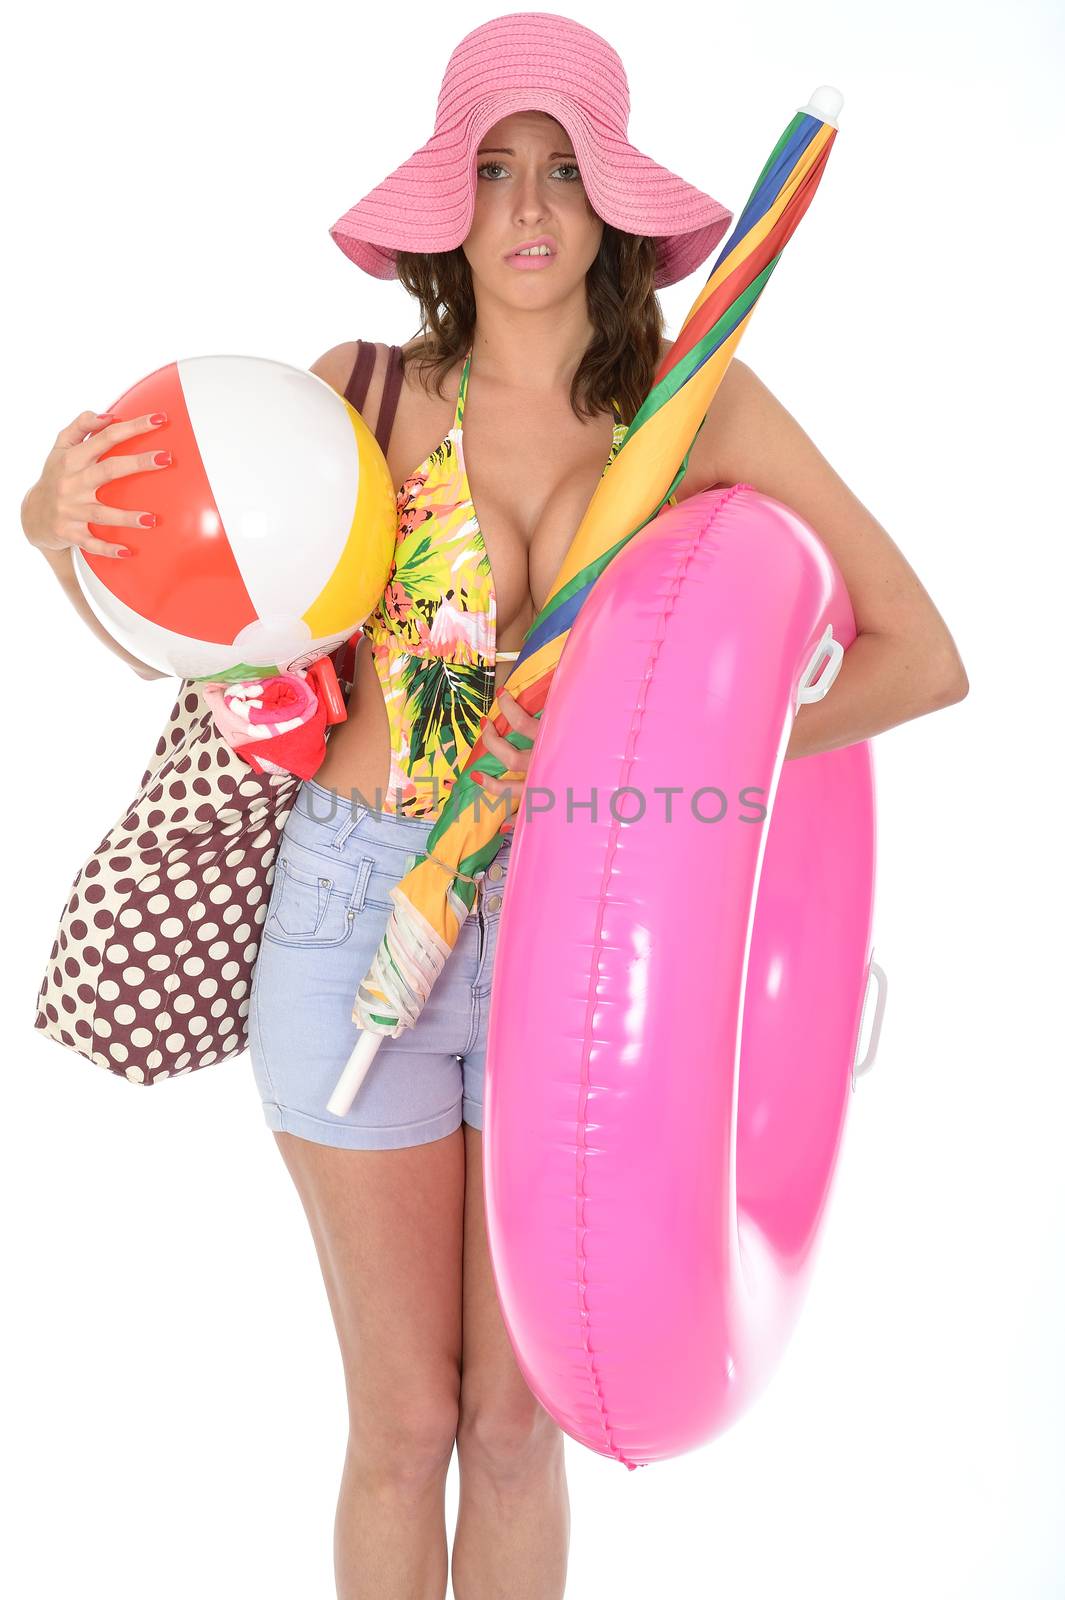 Young Attractive Woman Wearing a Swim Suit on Holiday Carrying a Beach Ball Rubber Ring and Parasol